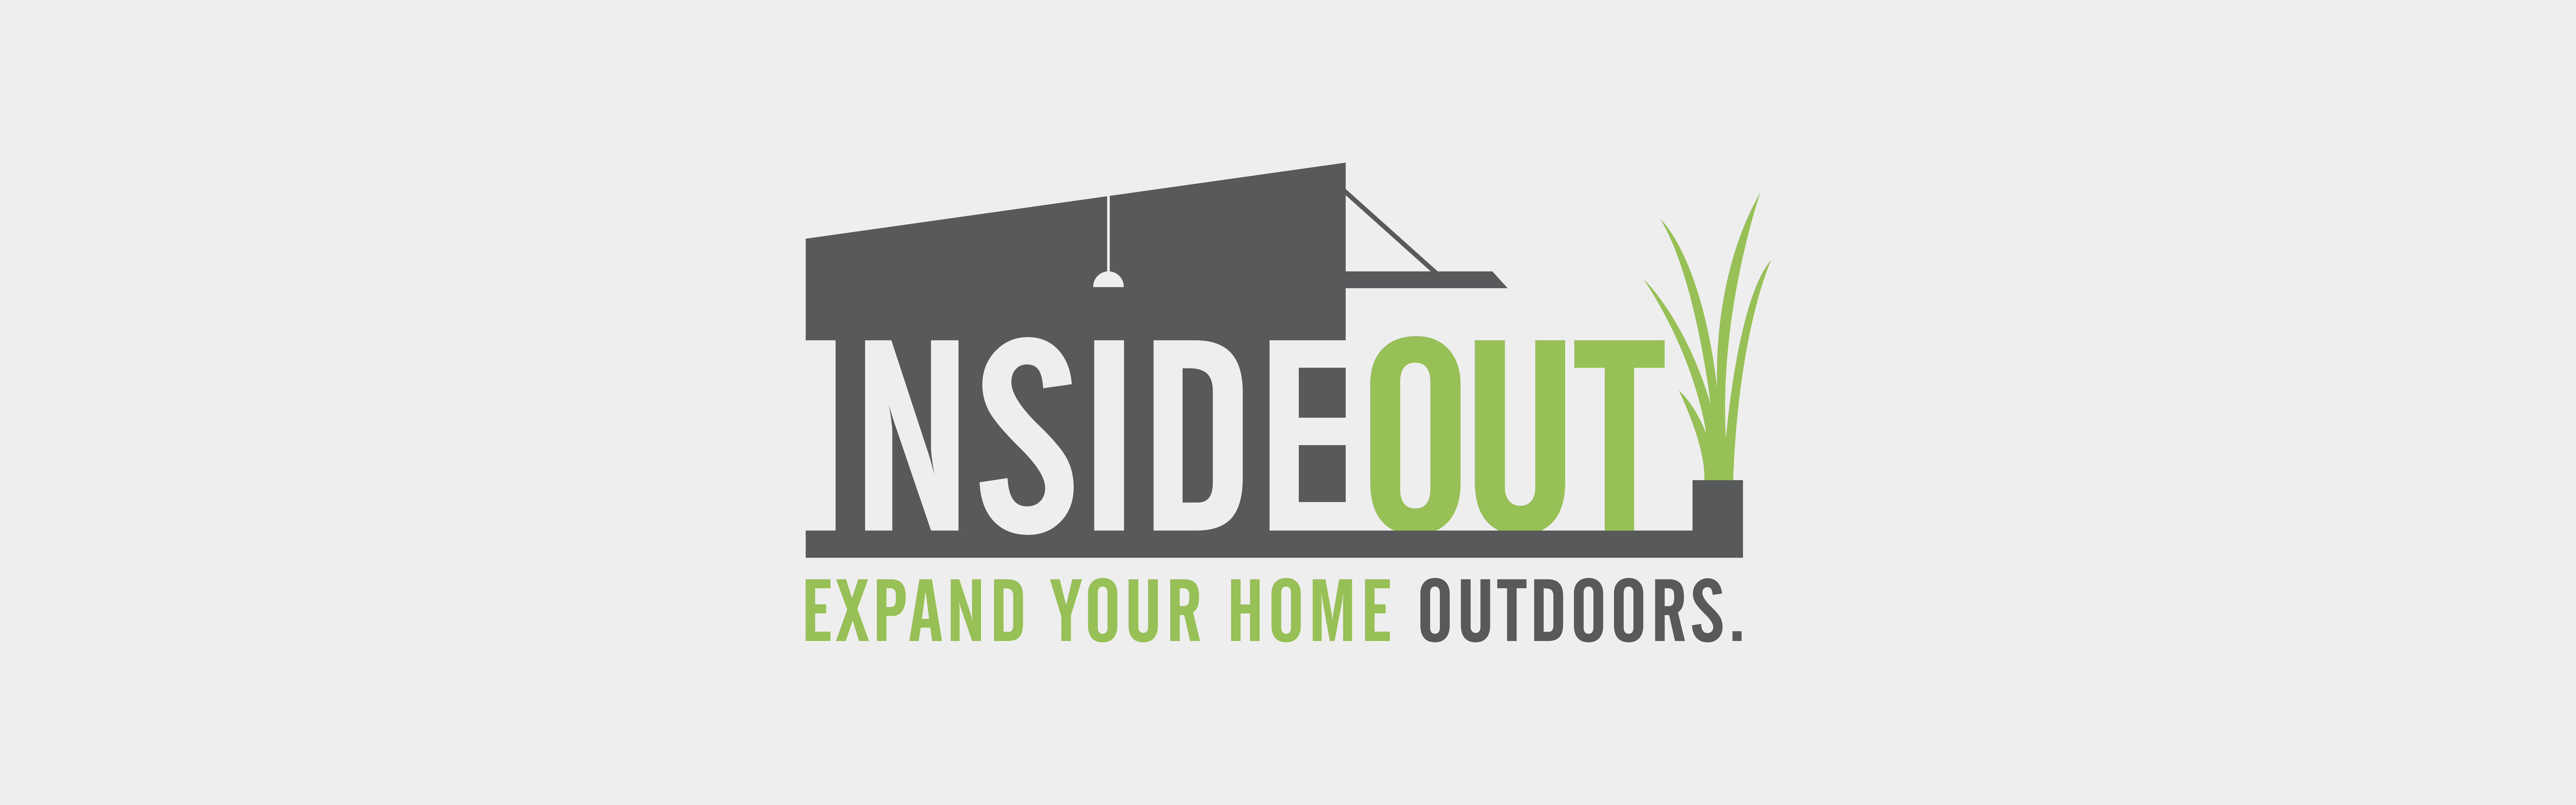 Logo of "Inside Out" with the slogan "expand your home outdoors," featuring a house silhouette with an open door leading to a section of green grass.